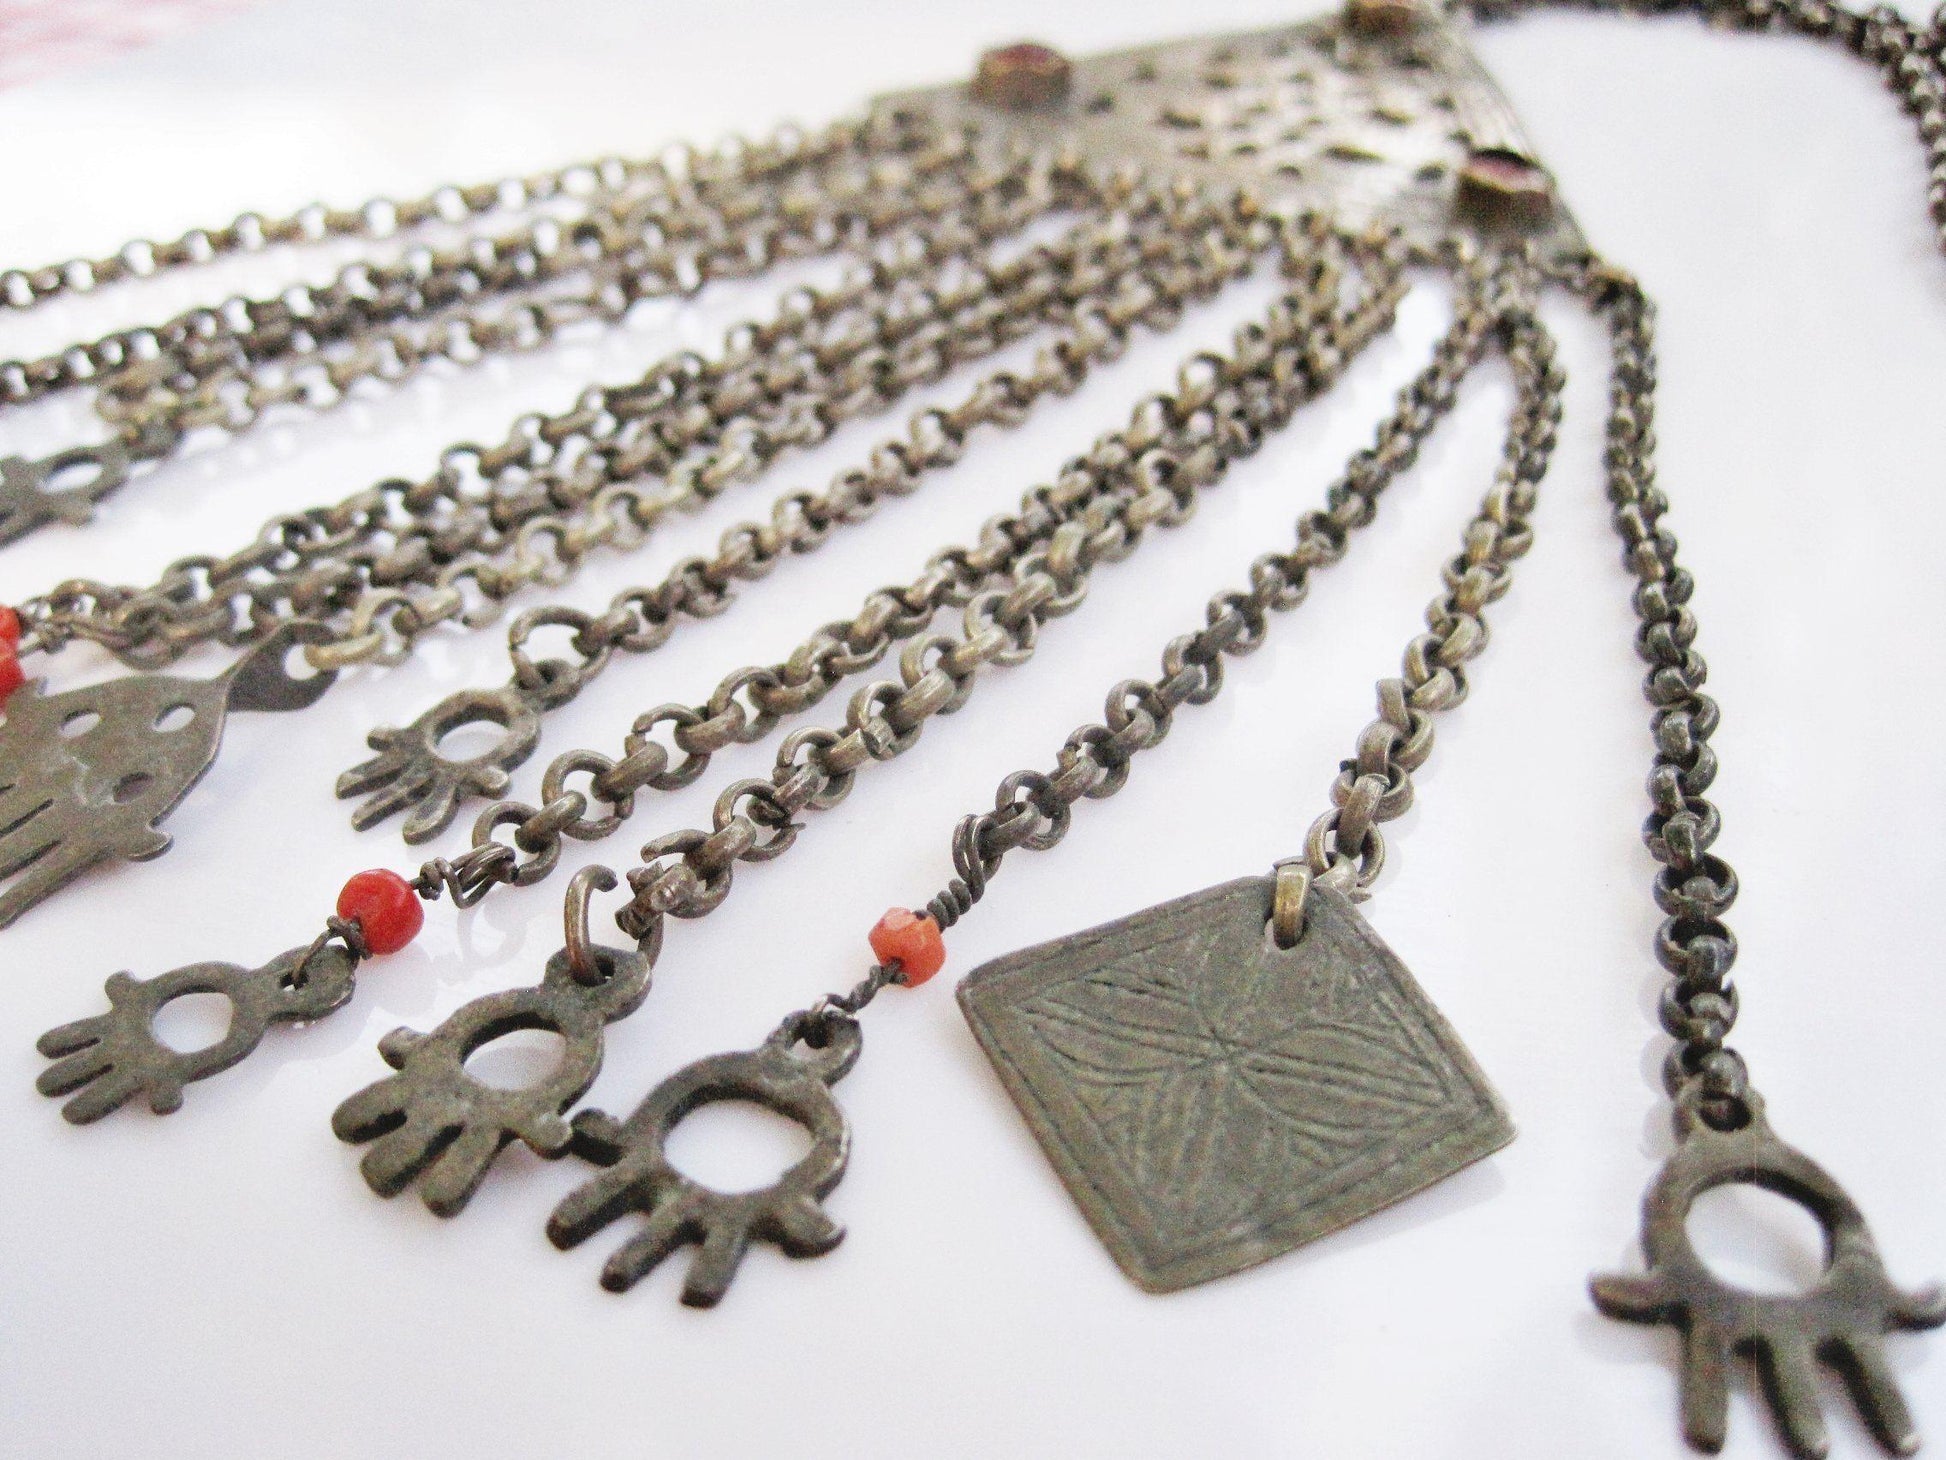 Vintage Silver and Coral Berber Necklace from Tunisia - Anteeka